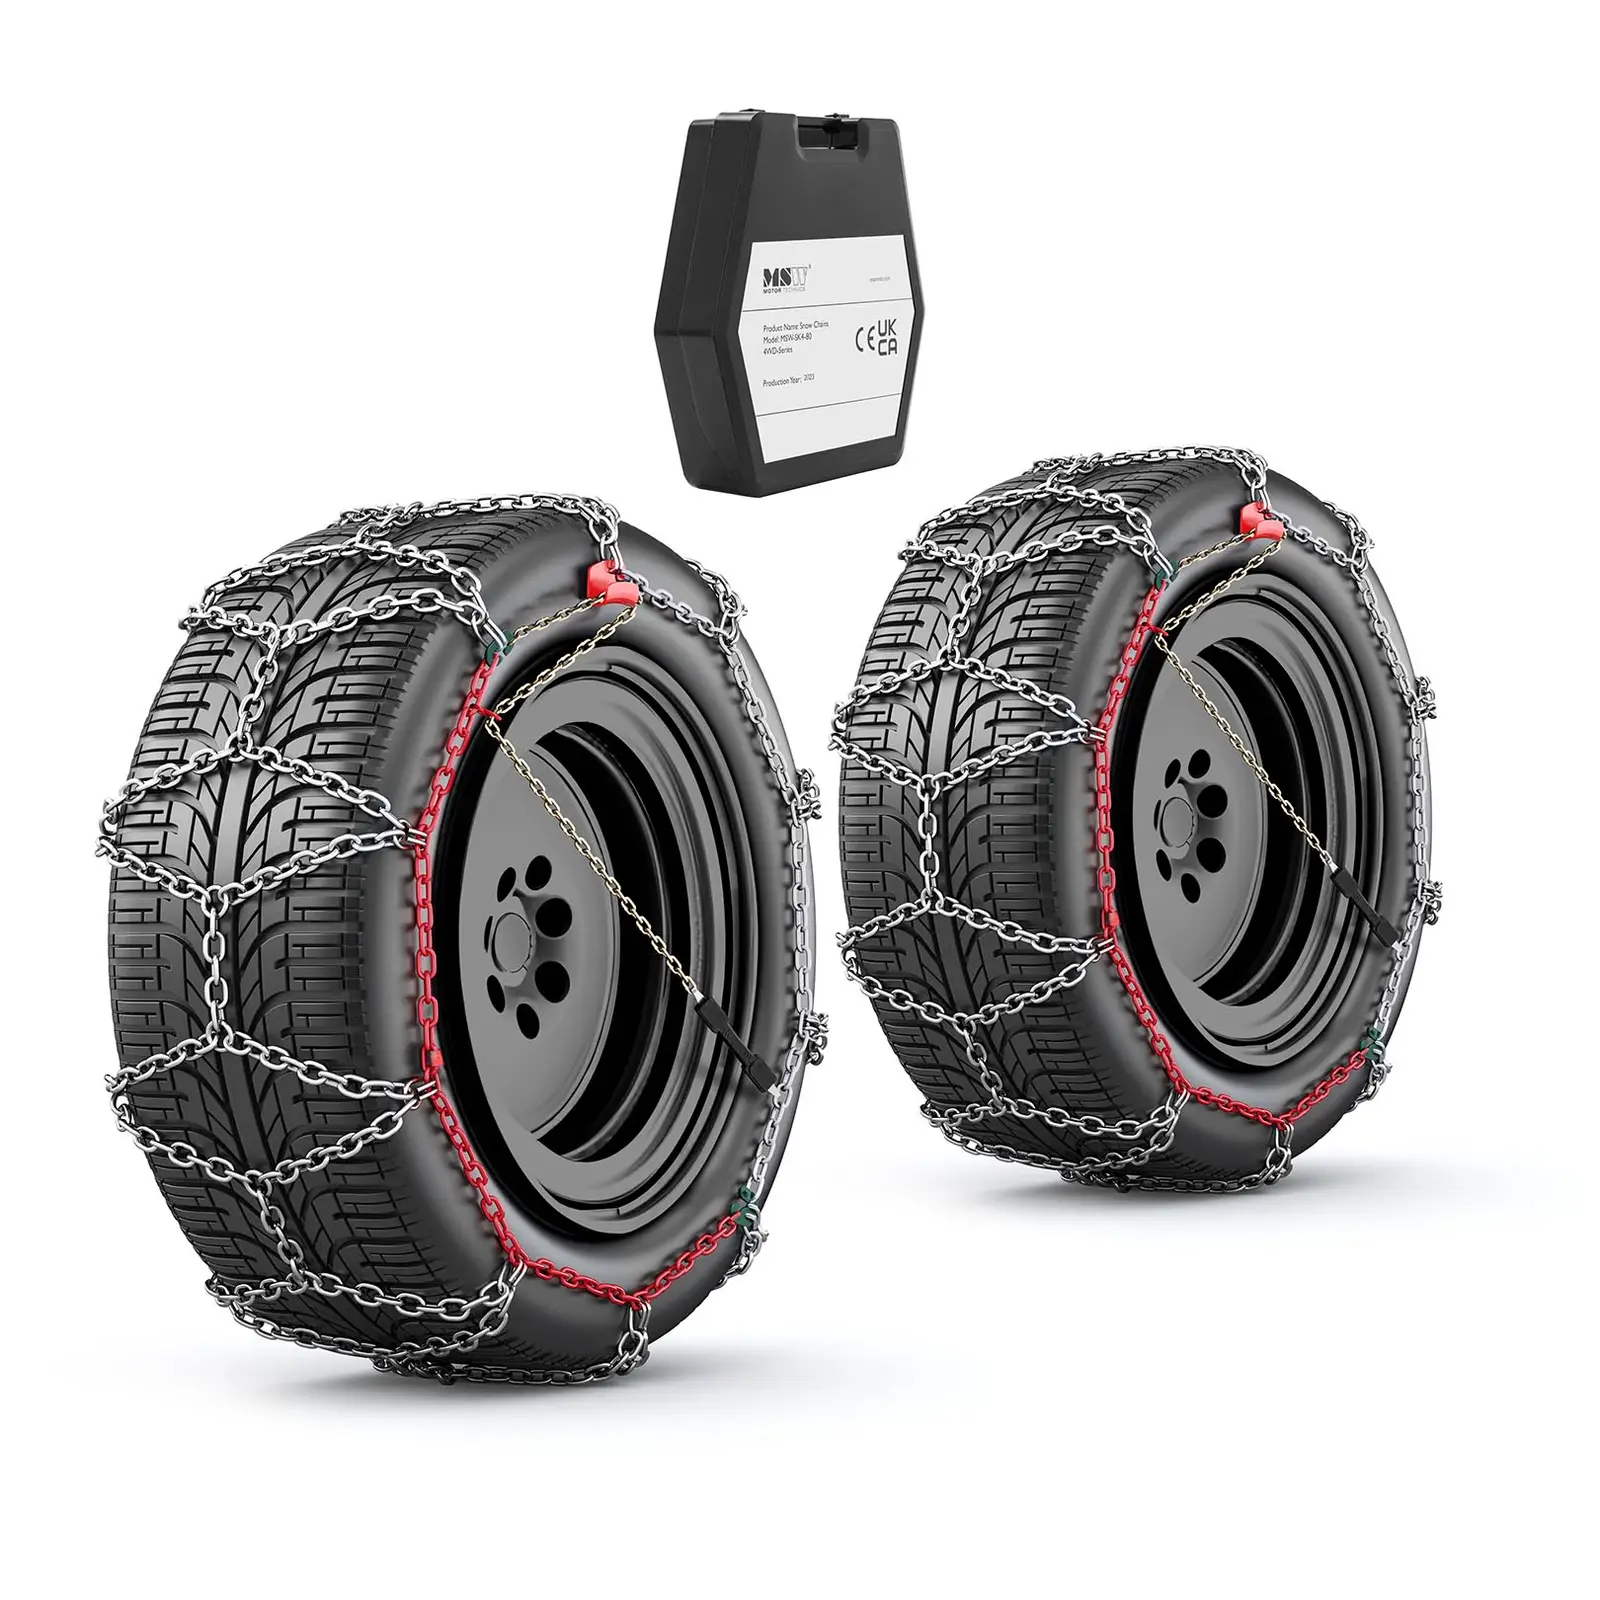 Snow Chains - 4WD (4x4) - 16 mm - EN 16662-1 - for tire sizes: 10x15 / 255/75 r15 / 31×10.50 r15 and more